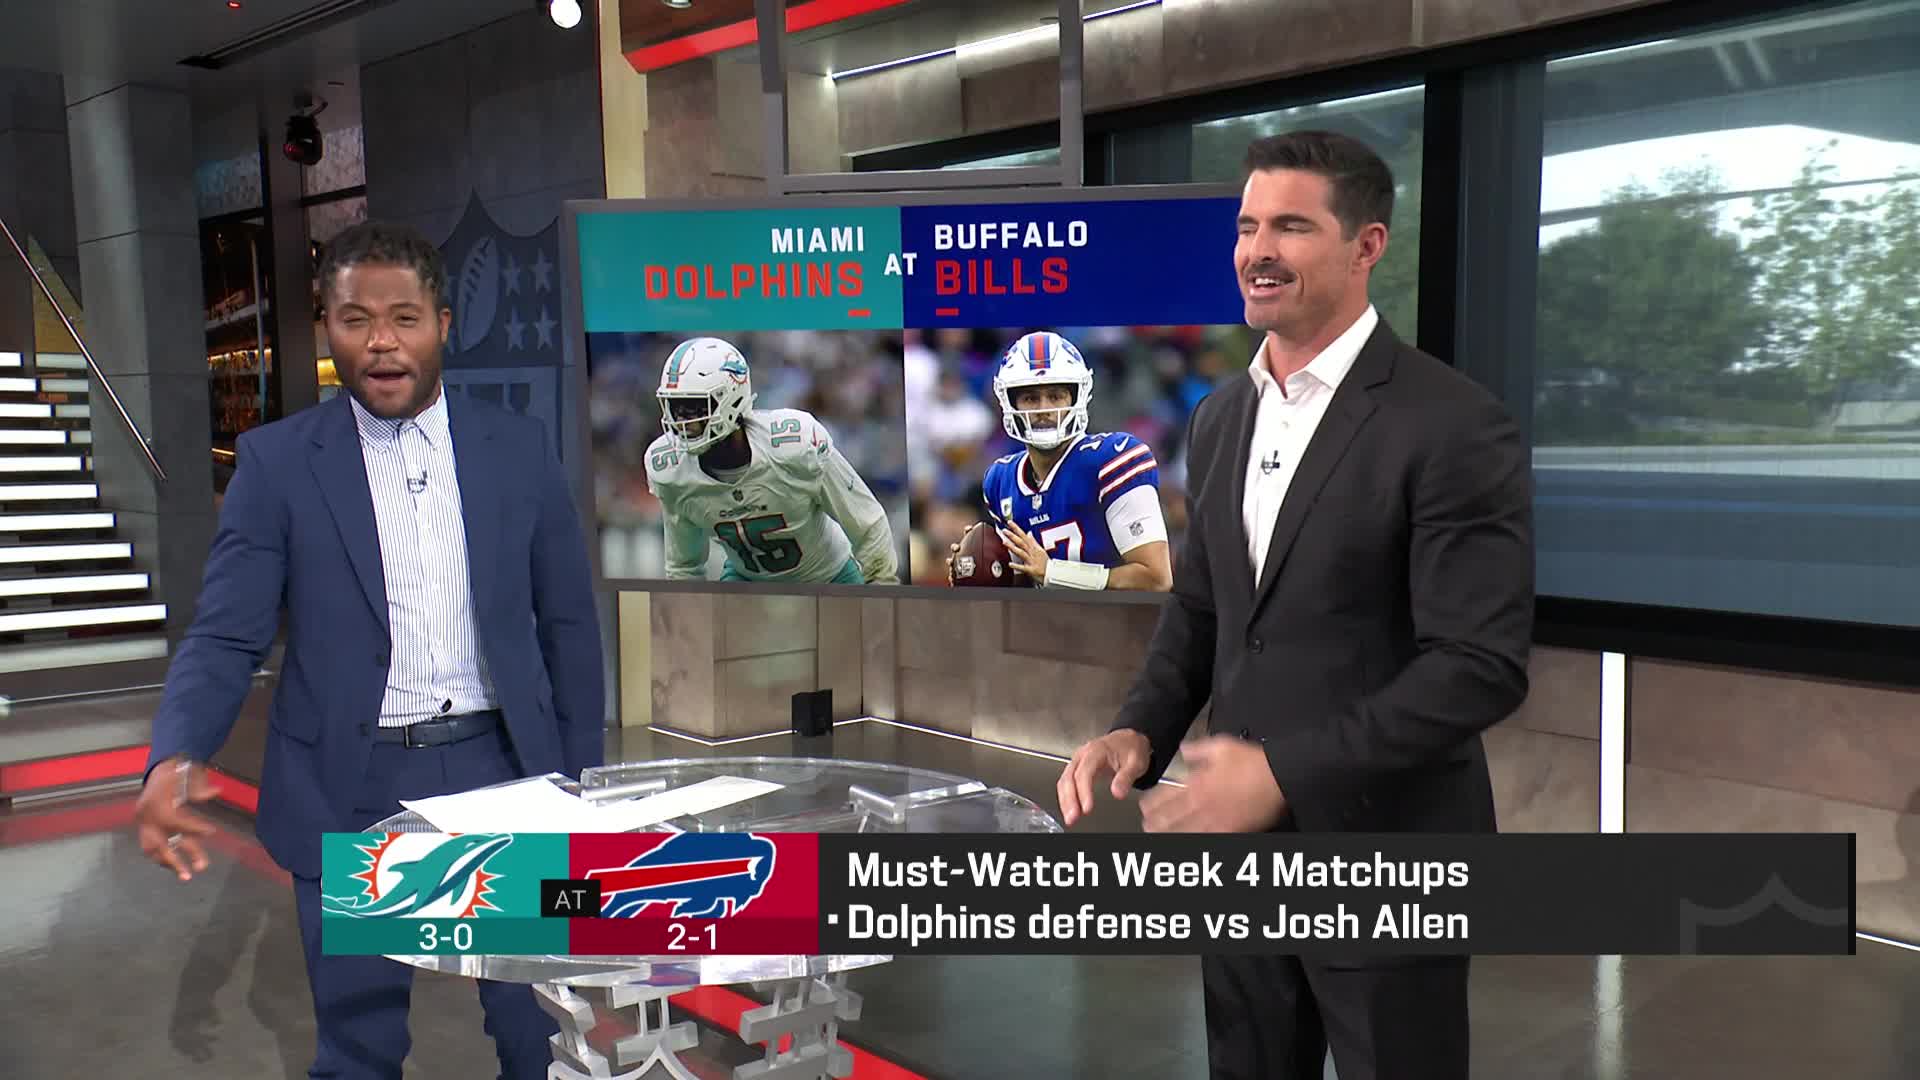 One must-watch individual matchup in Dolphins-Bills NFL Total Access